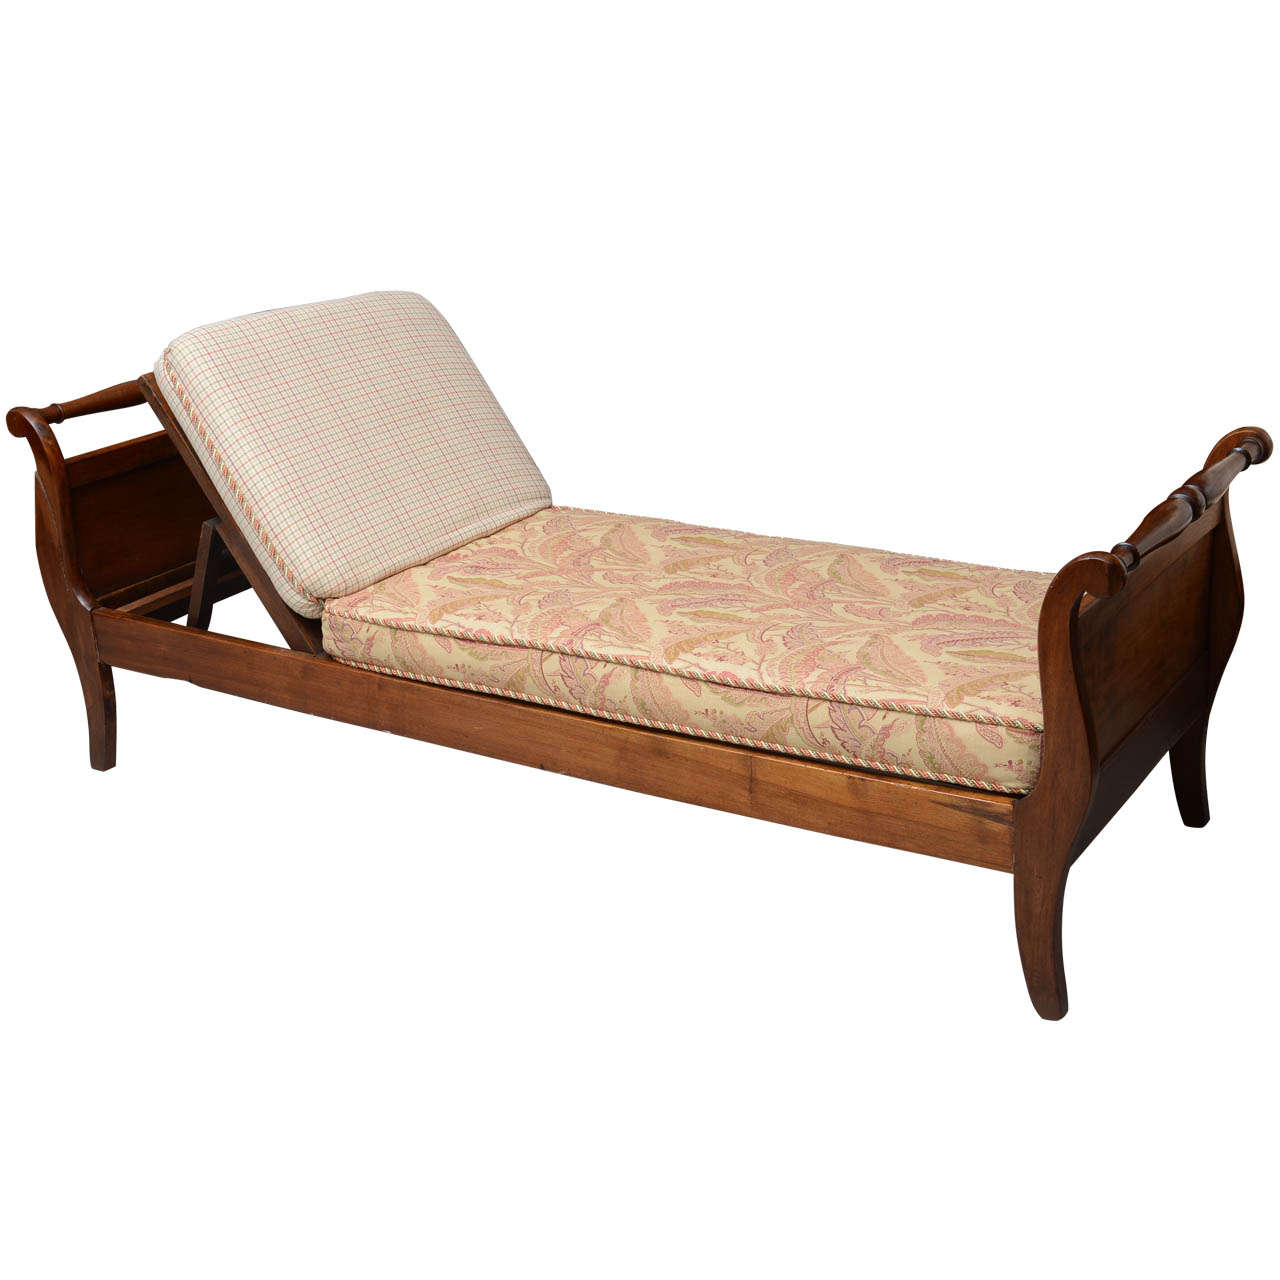 Arts & Crafts or Mission Daybed, circa 1905